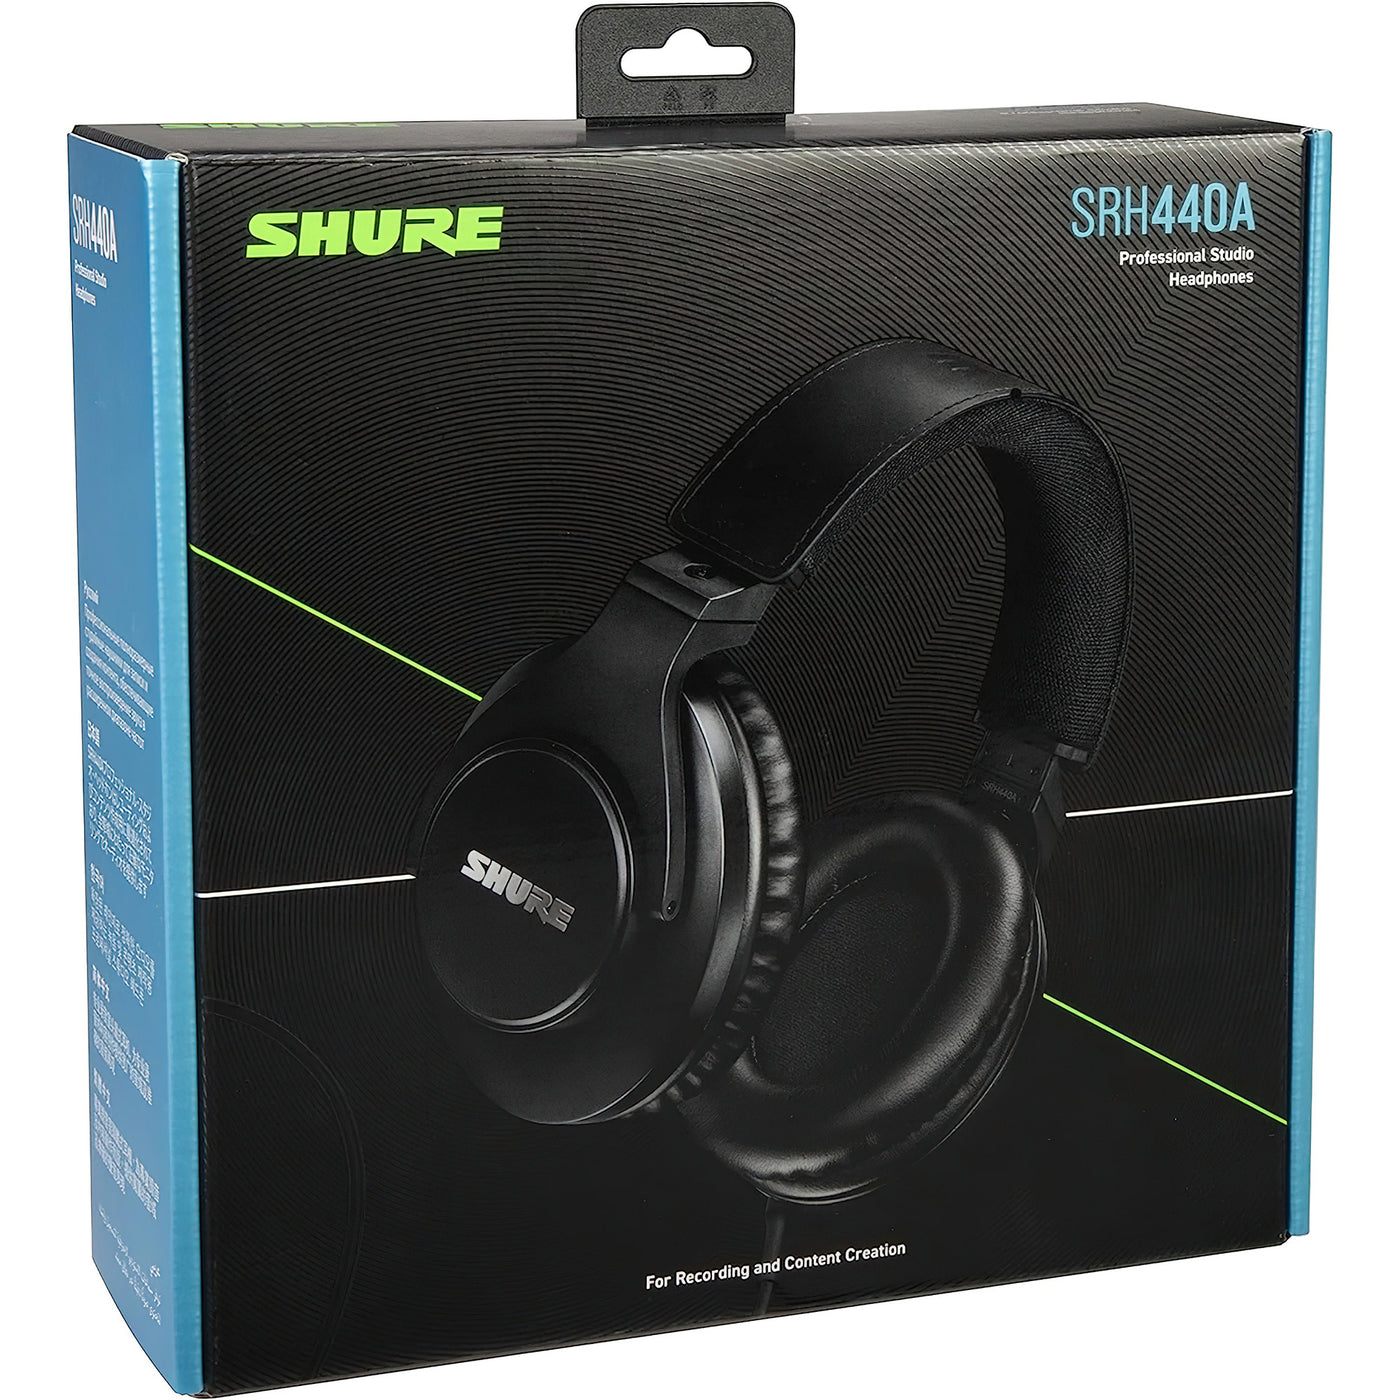 Shure Over-Ear Wired Headphones for Monitoring & Recording, Professional Studio Grade, Enhanced Frequency Response, Work with All Audio Devices, Adjustable & Collapsible Design (SRH440A)